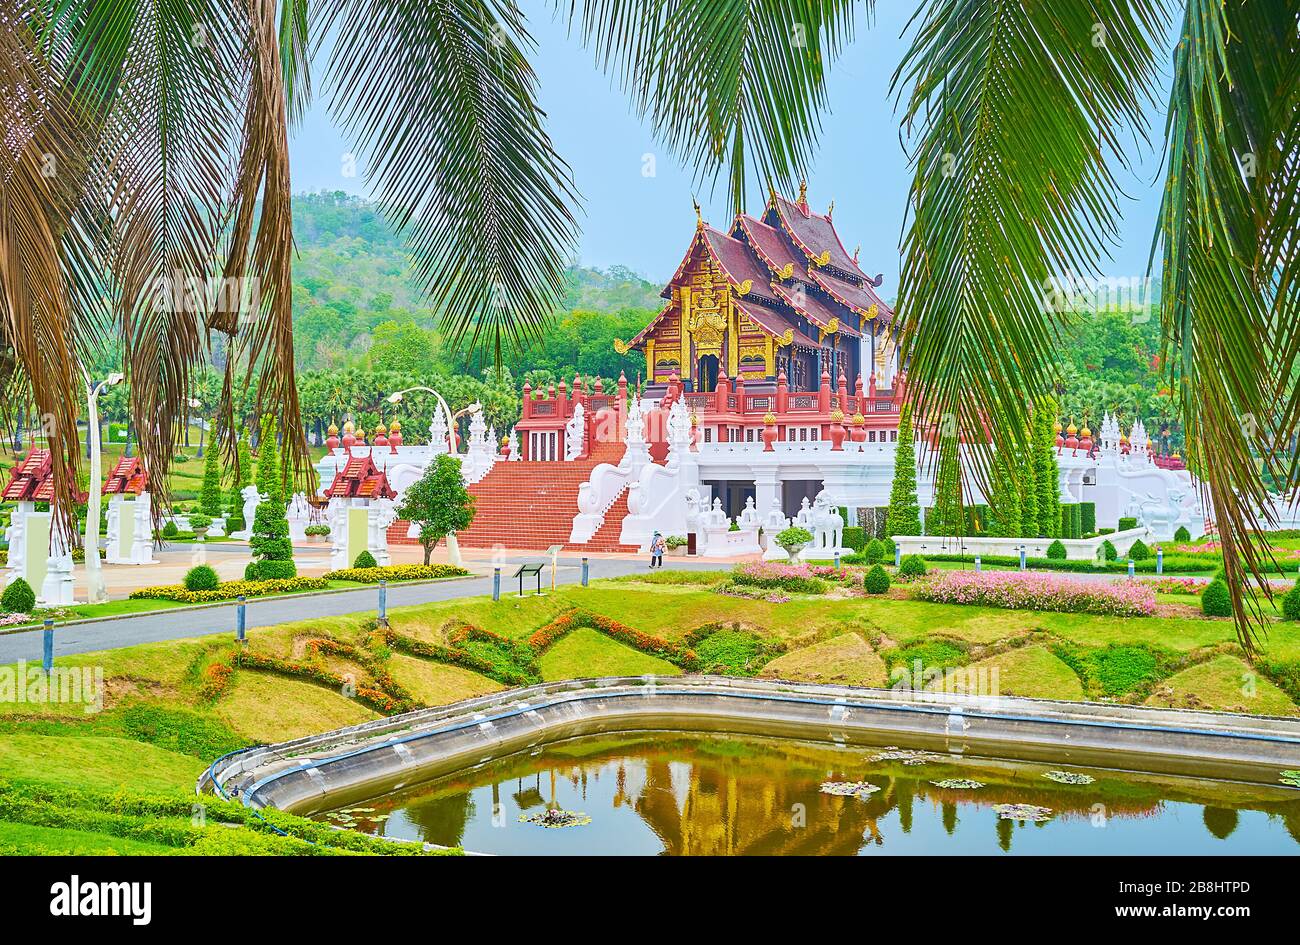 The view on magnificent Royal pavilion, surrounded by red staircases and white sculptures, through the lush green palm branches, Rajapruek park, Chian Stock Photo